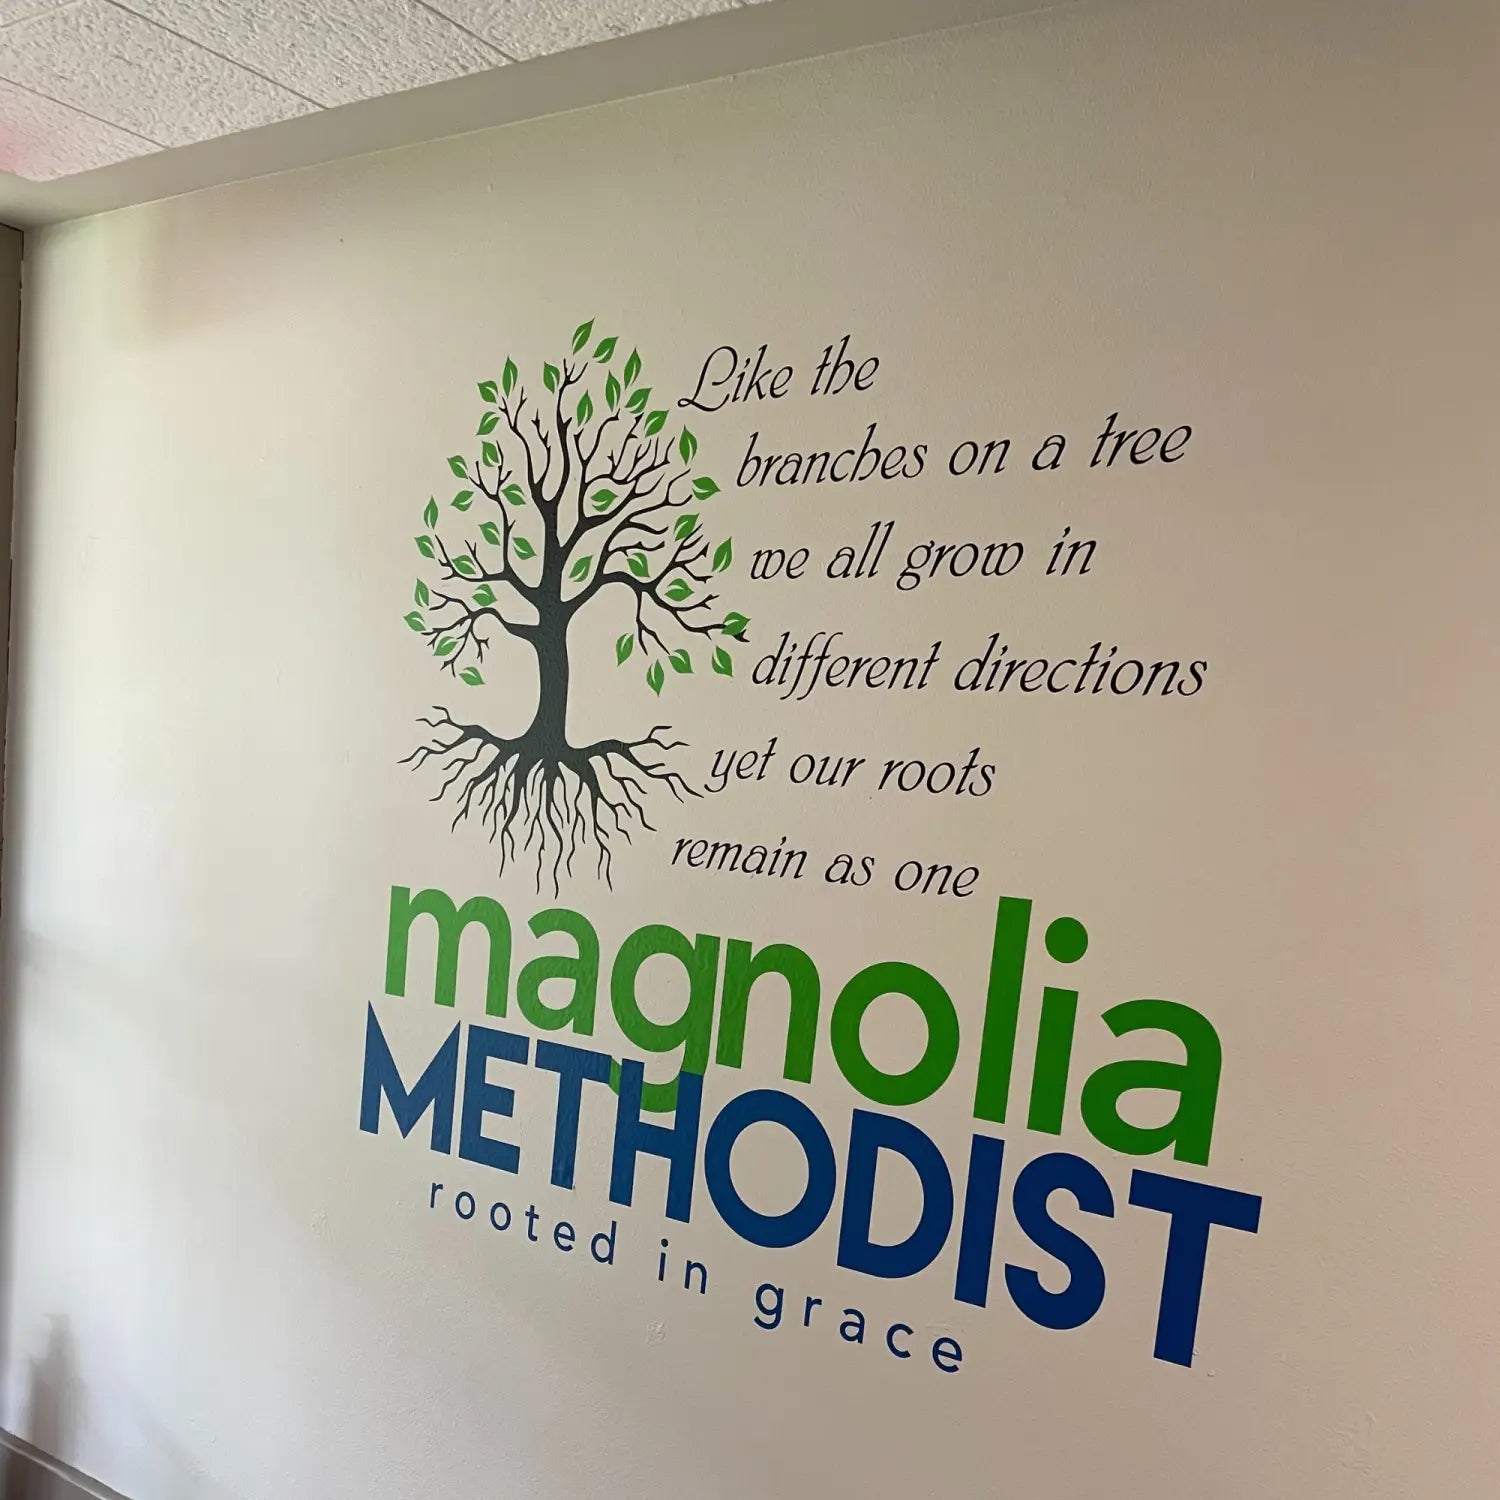  Beautiful vinyl wall decal custom designed for a church entryway wall. Using one of our premade designs we incorporated the customers chruch logo and tag line perfectly to welcome guests to their church beautifully!